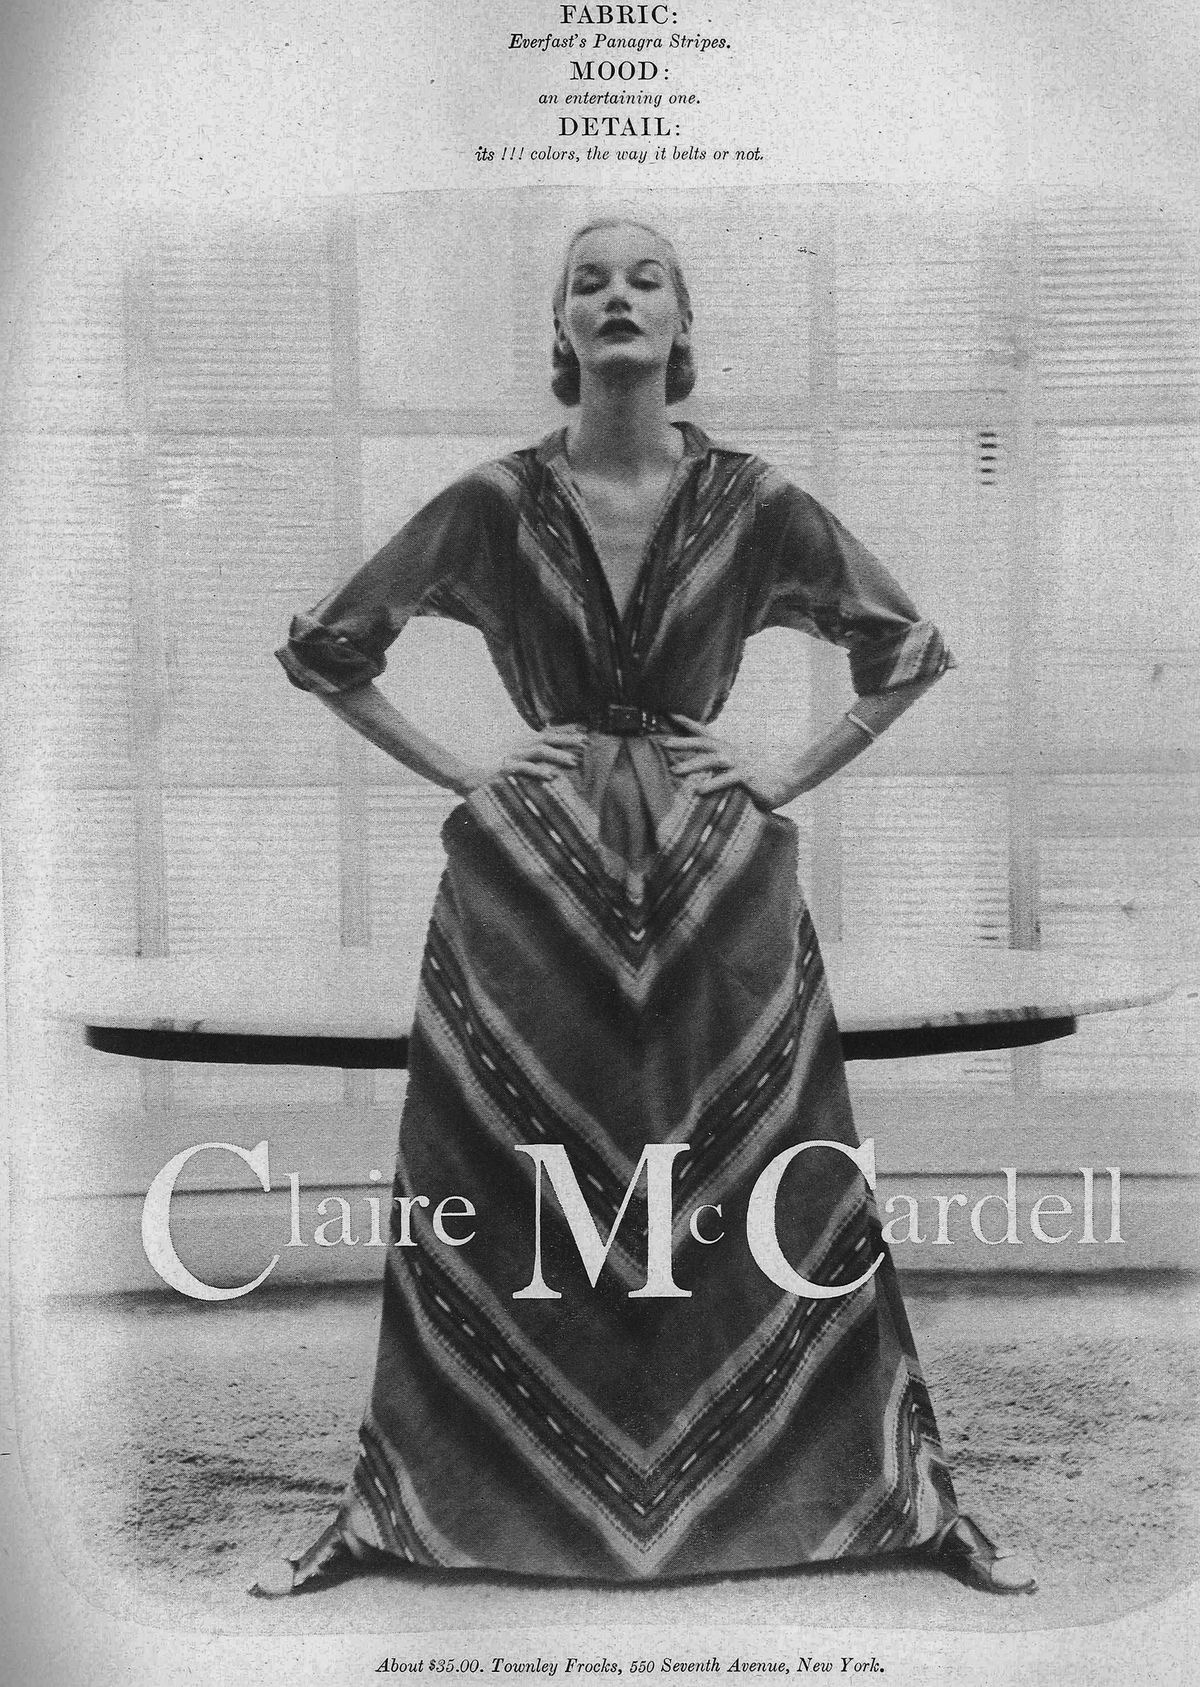 Iconic fashion designer - The Claire McCardell Project